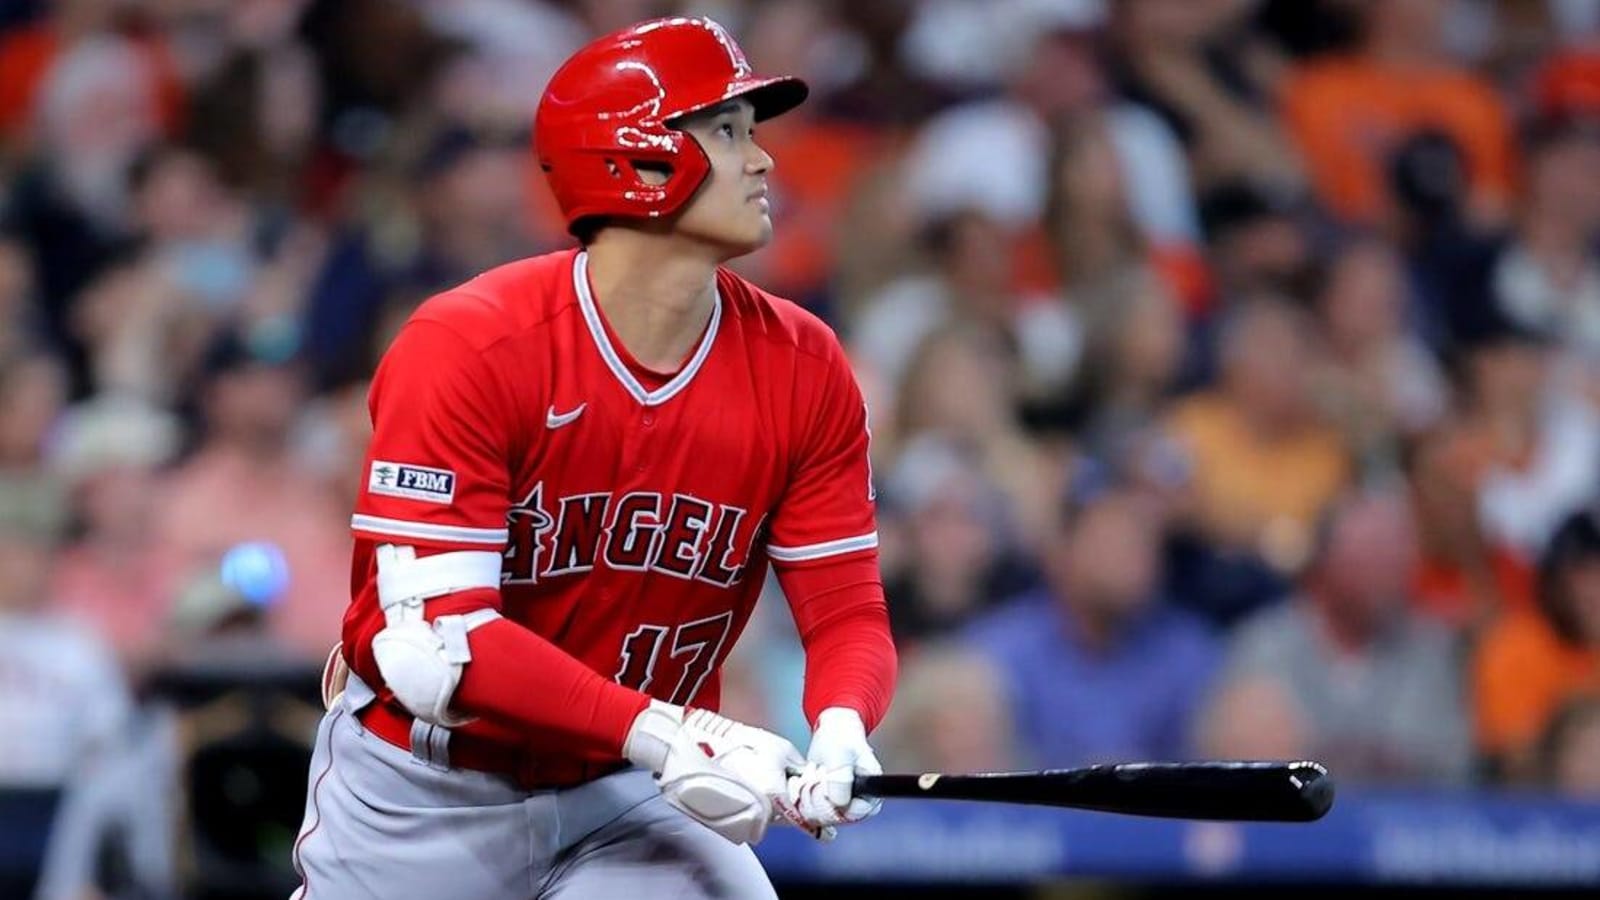 Angels-Rangers game promises intriguing matchup